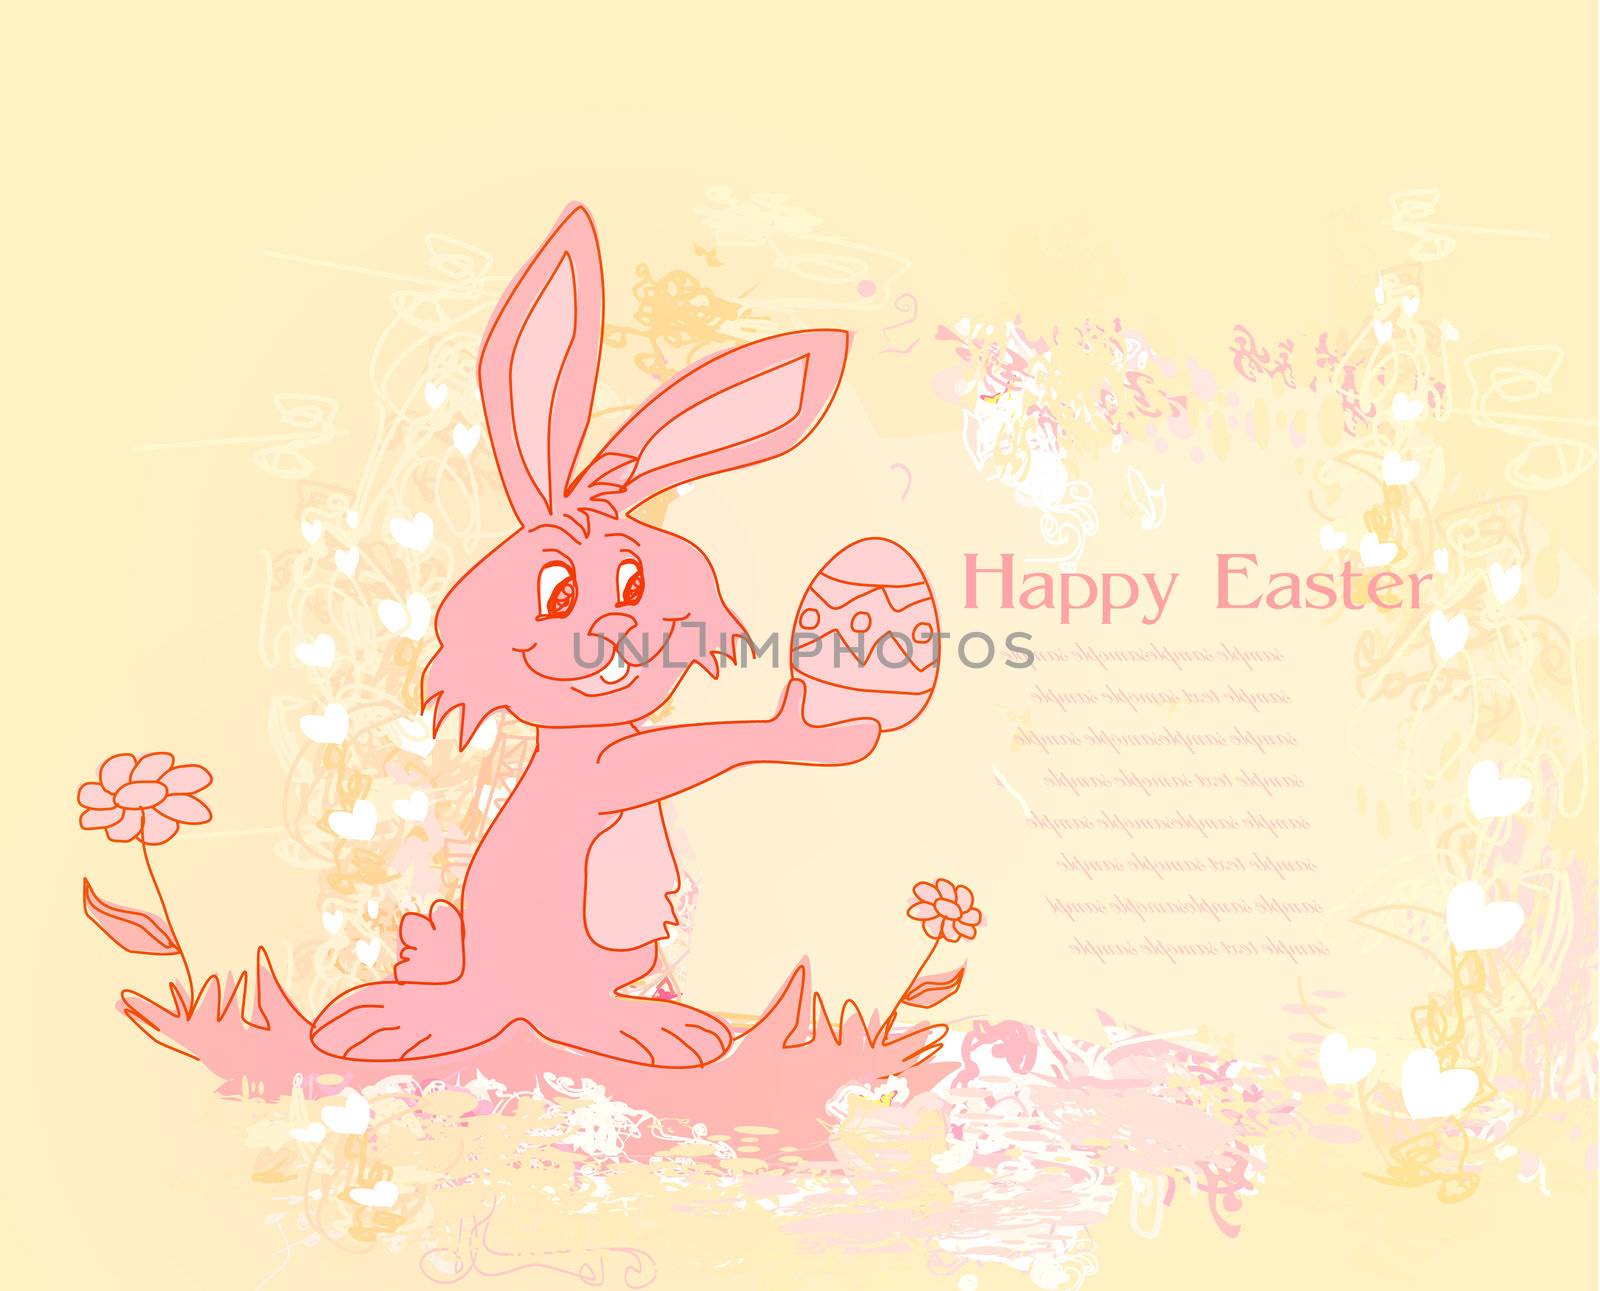 Illustration of happy Easter bunny carrying egg by JackyBrown